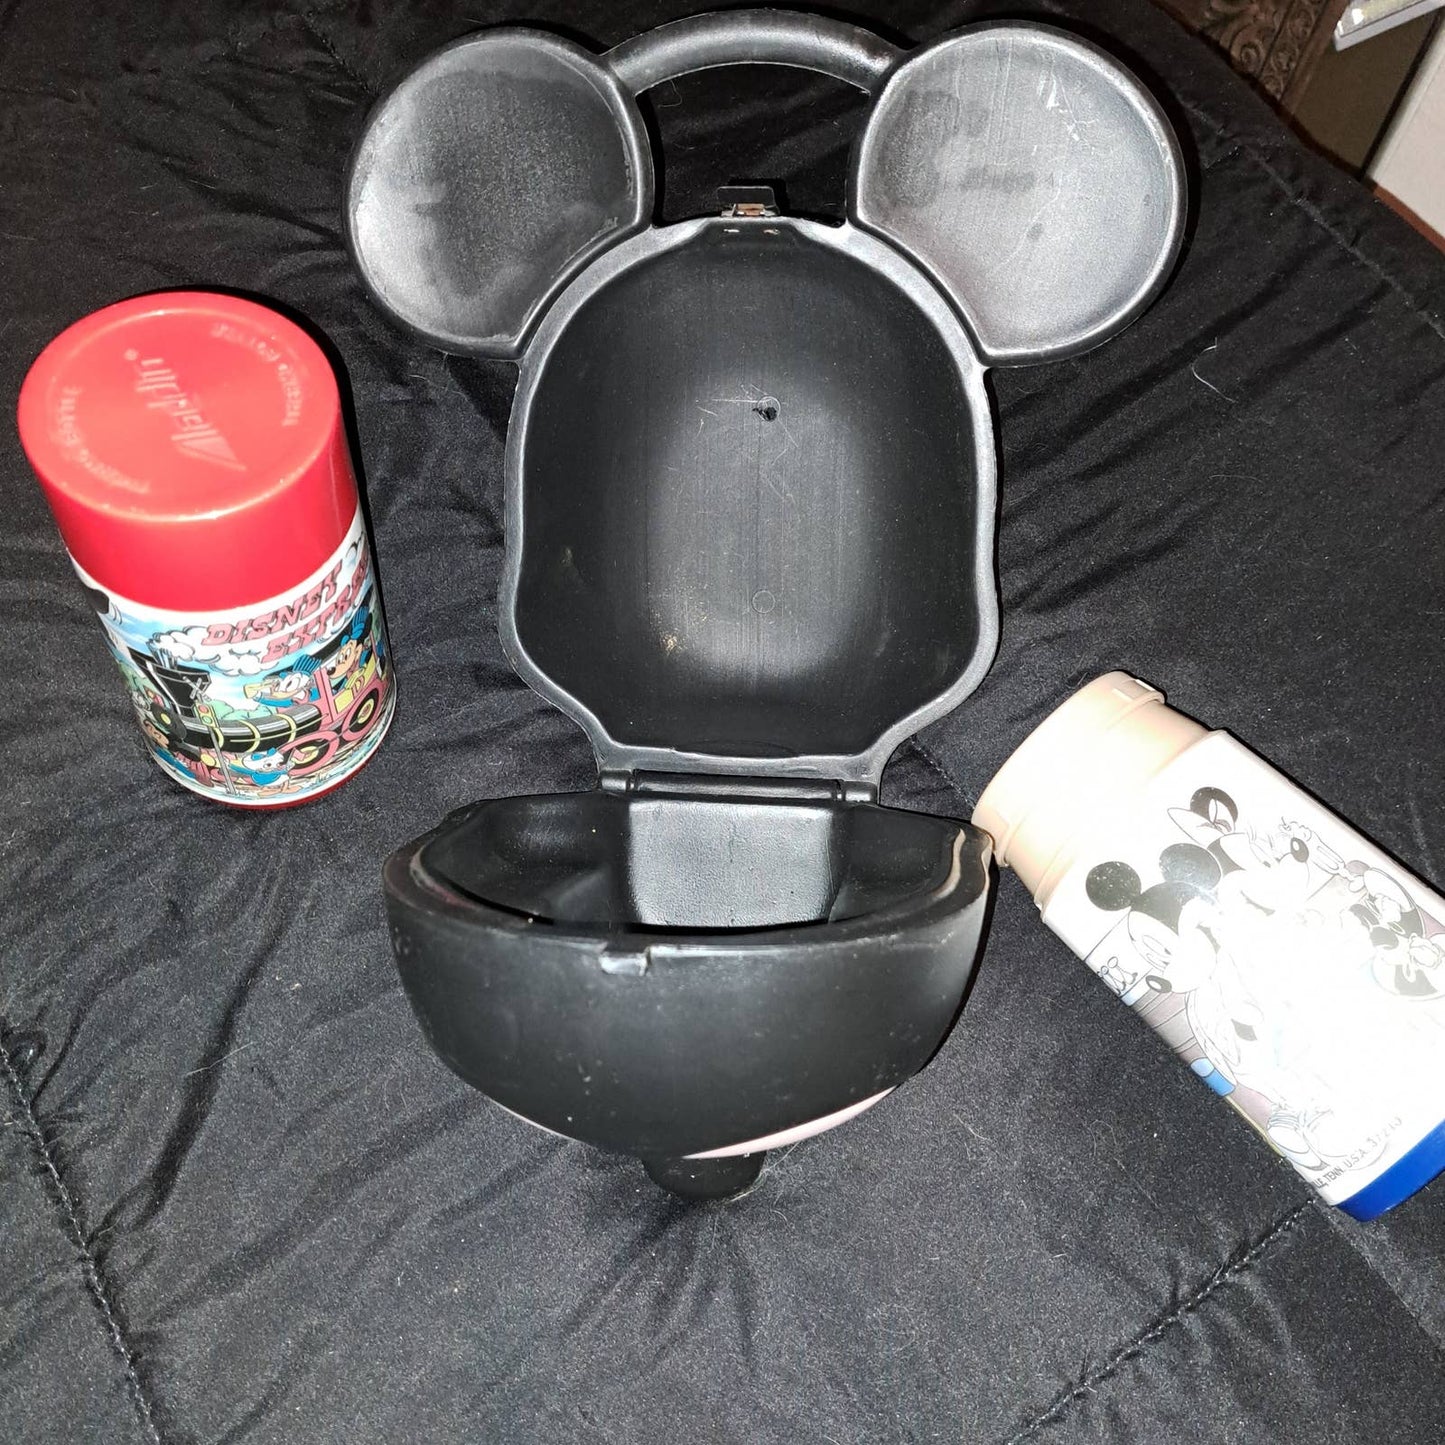 VINTAGE Mickey Mouse Lunch Box with 2 Vintage Disney Thermos